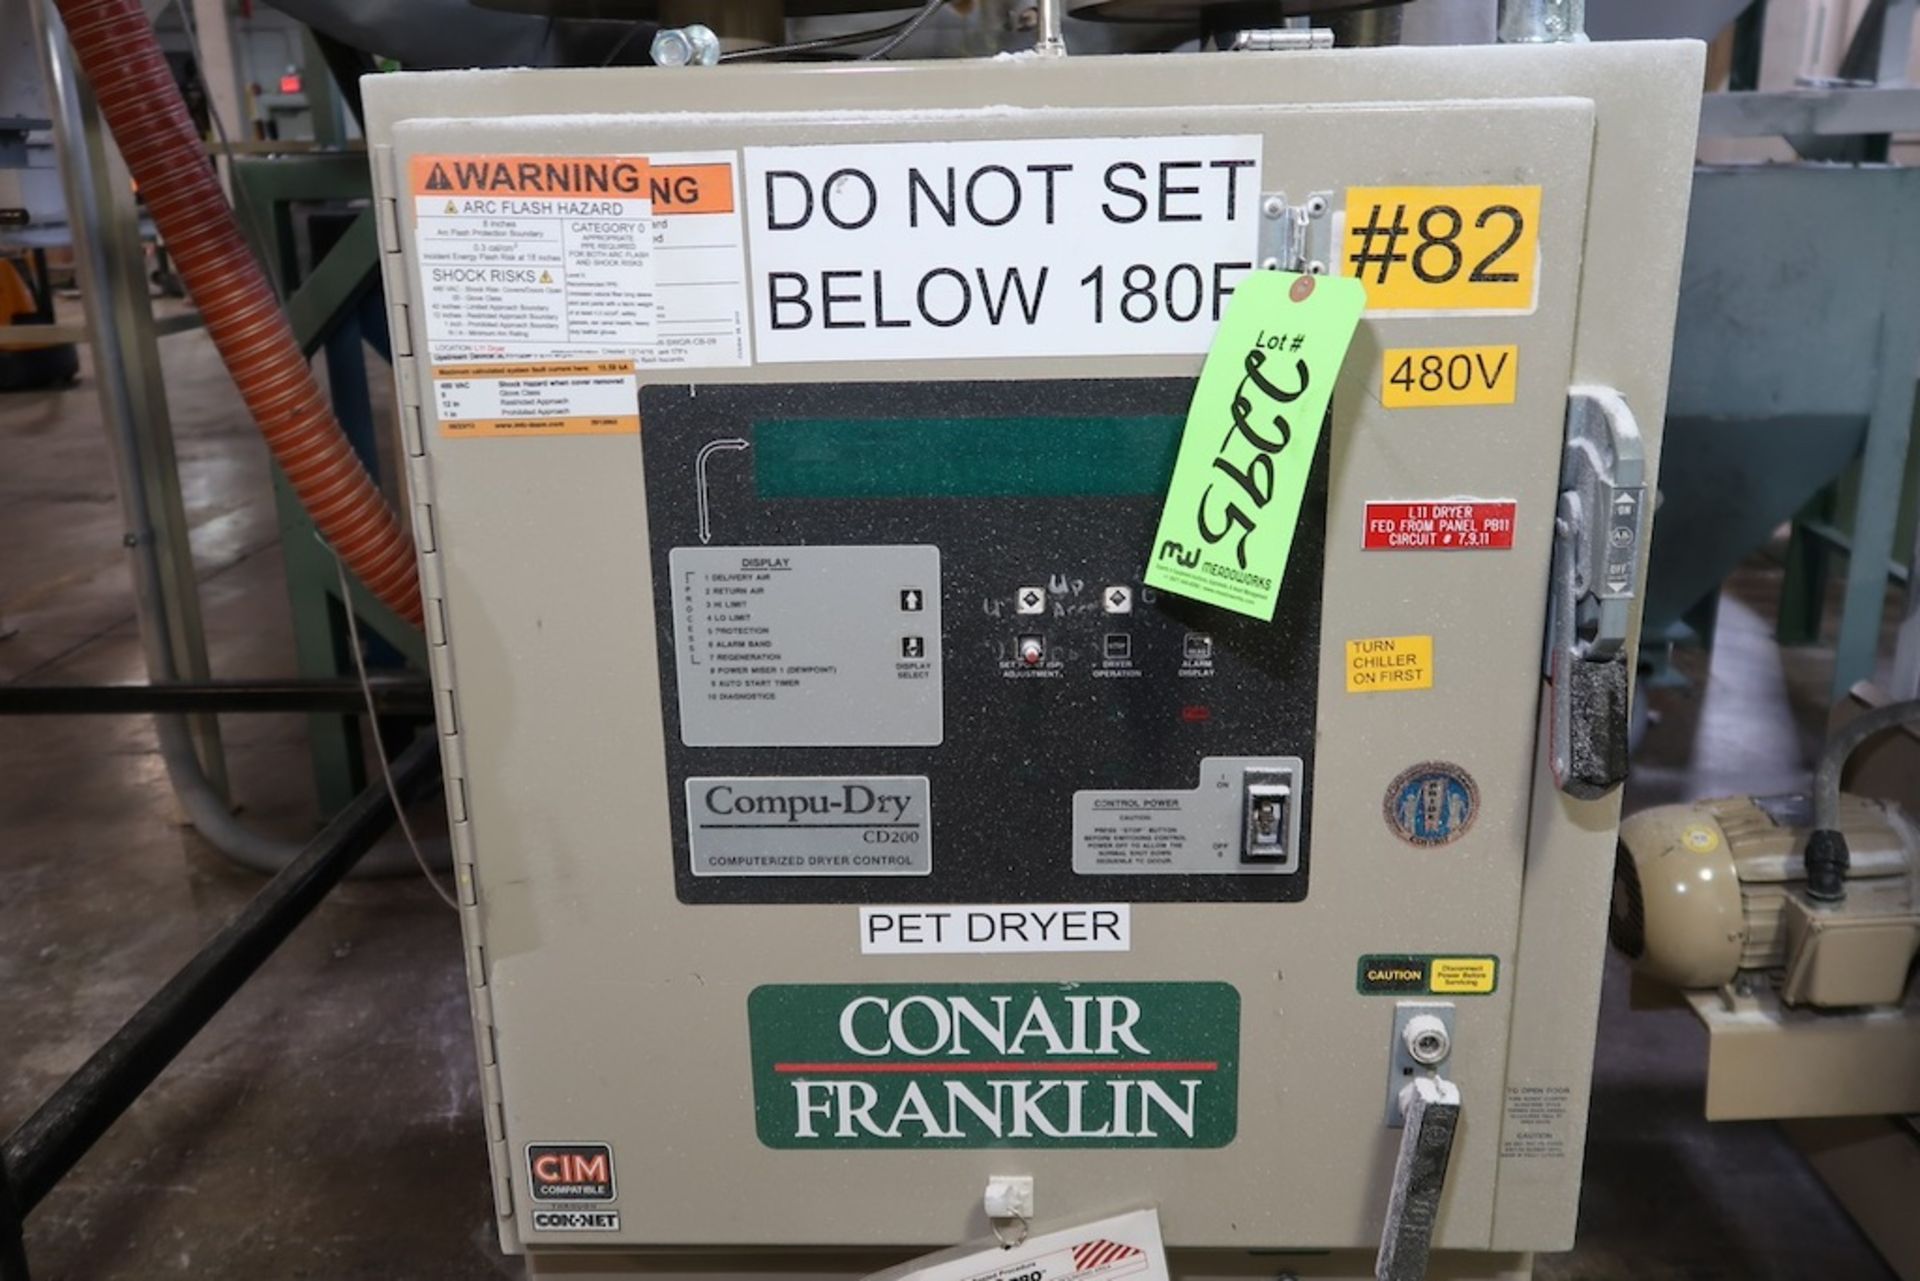 Conair Franklin Material Dryer - Image 3 of 4